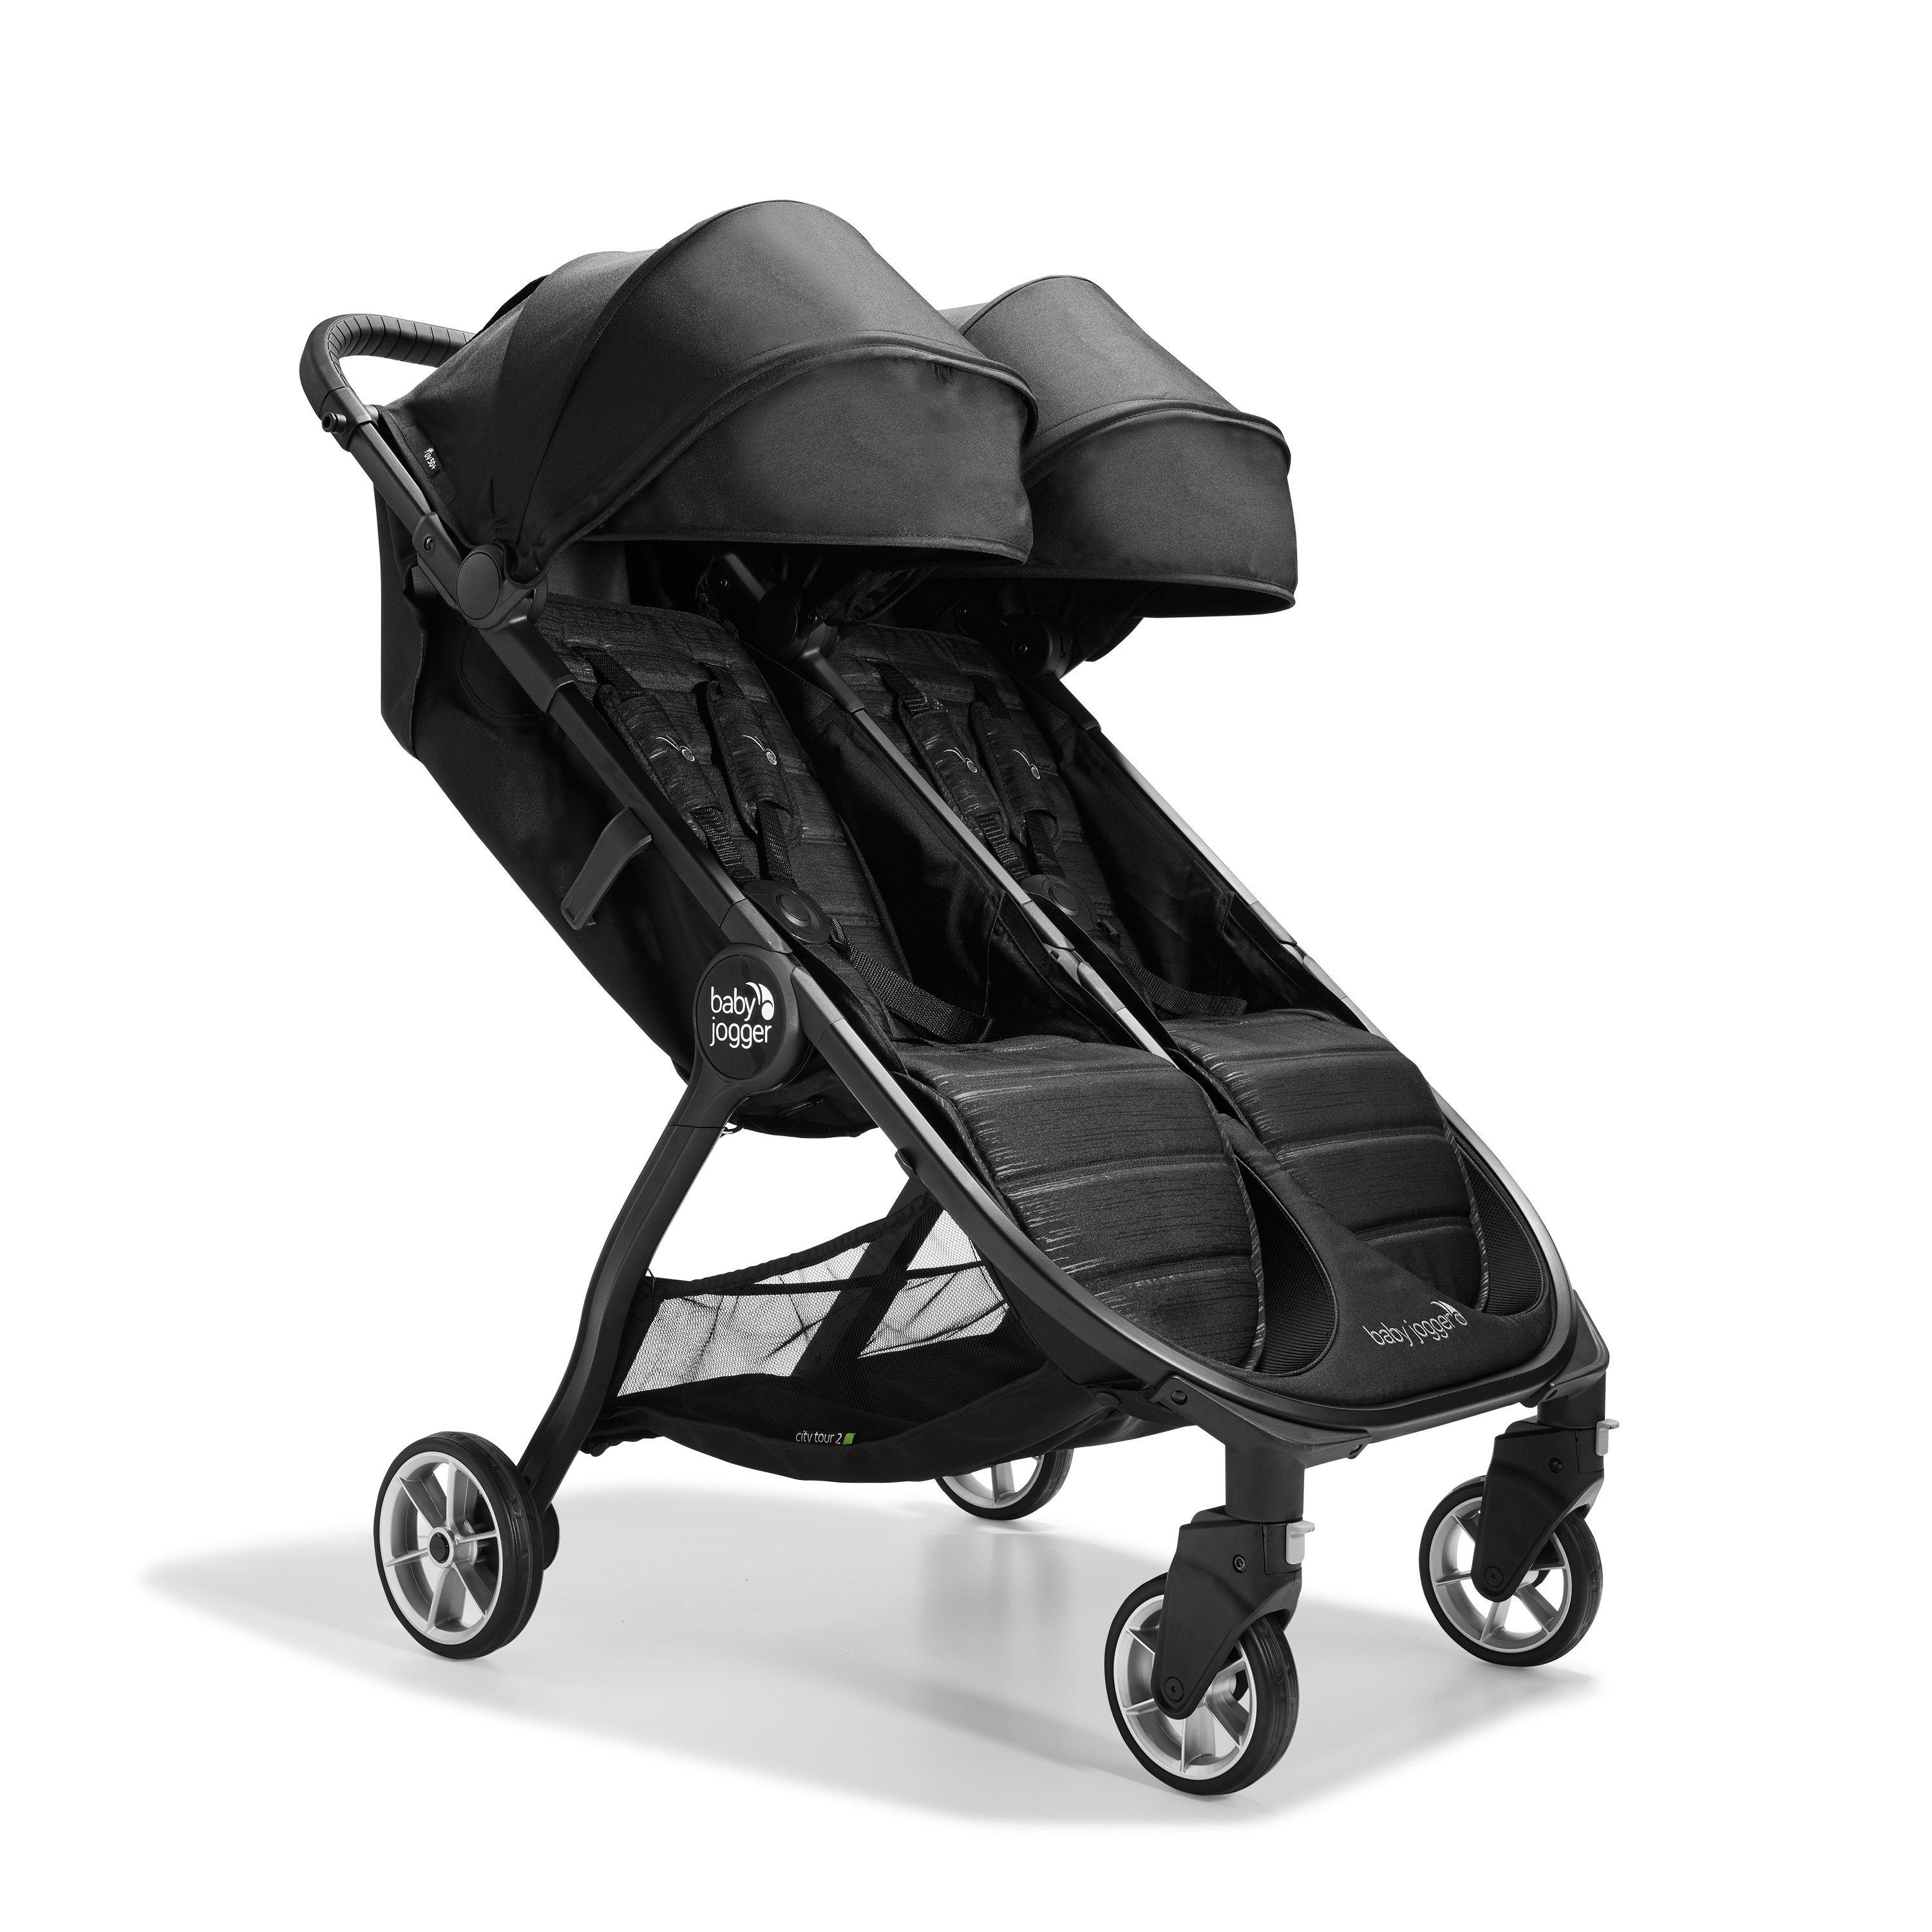 Peer Syge person godt Baby Jogger city tour™ 2 double stroller | Baby Jogger